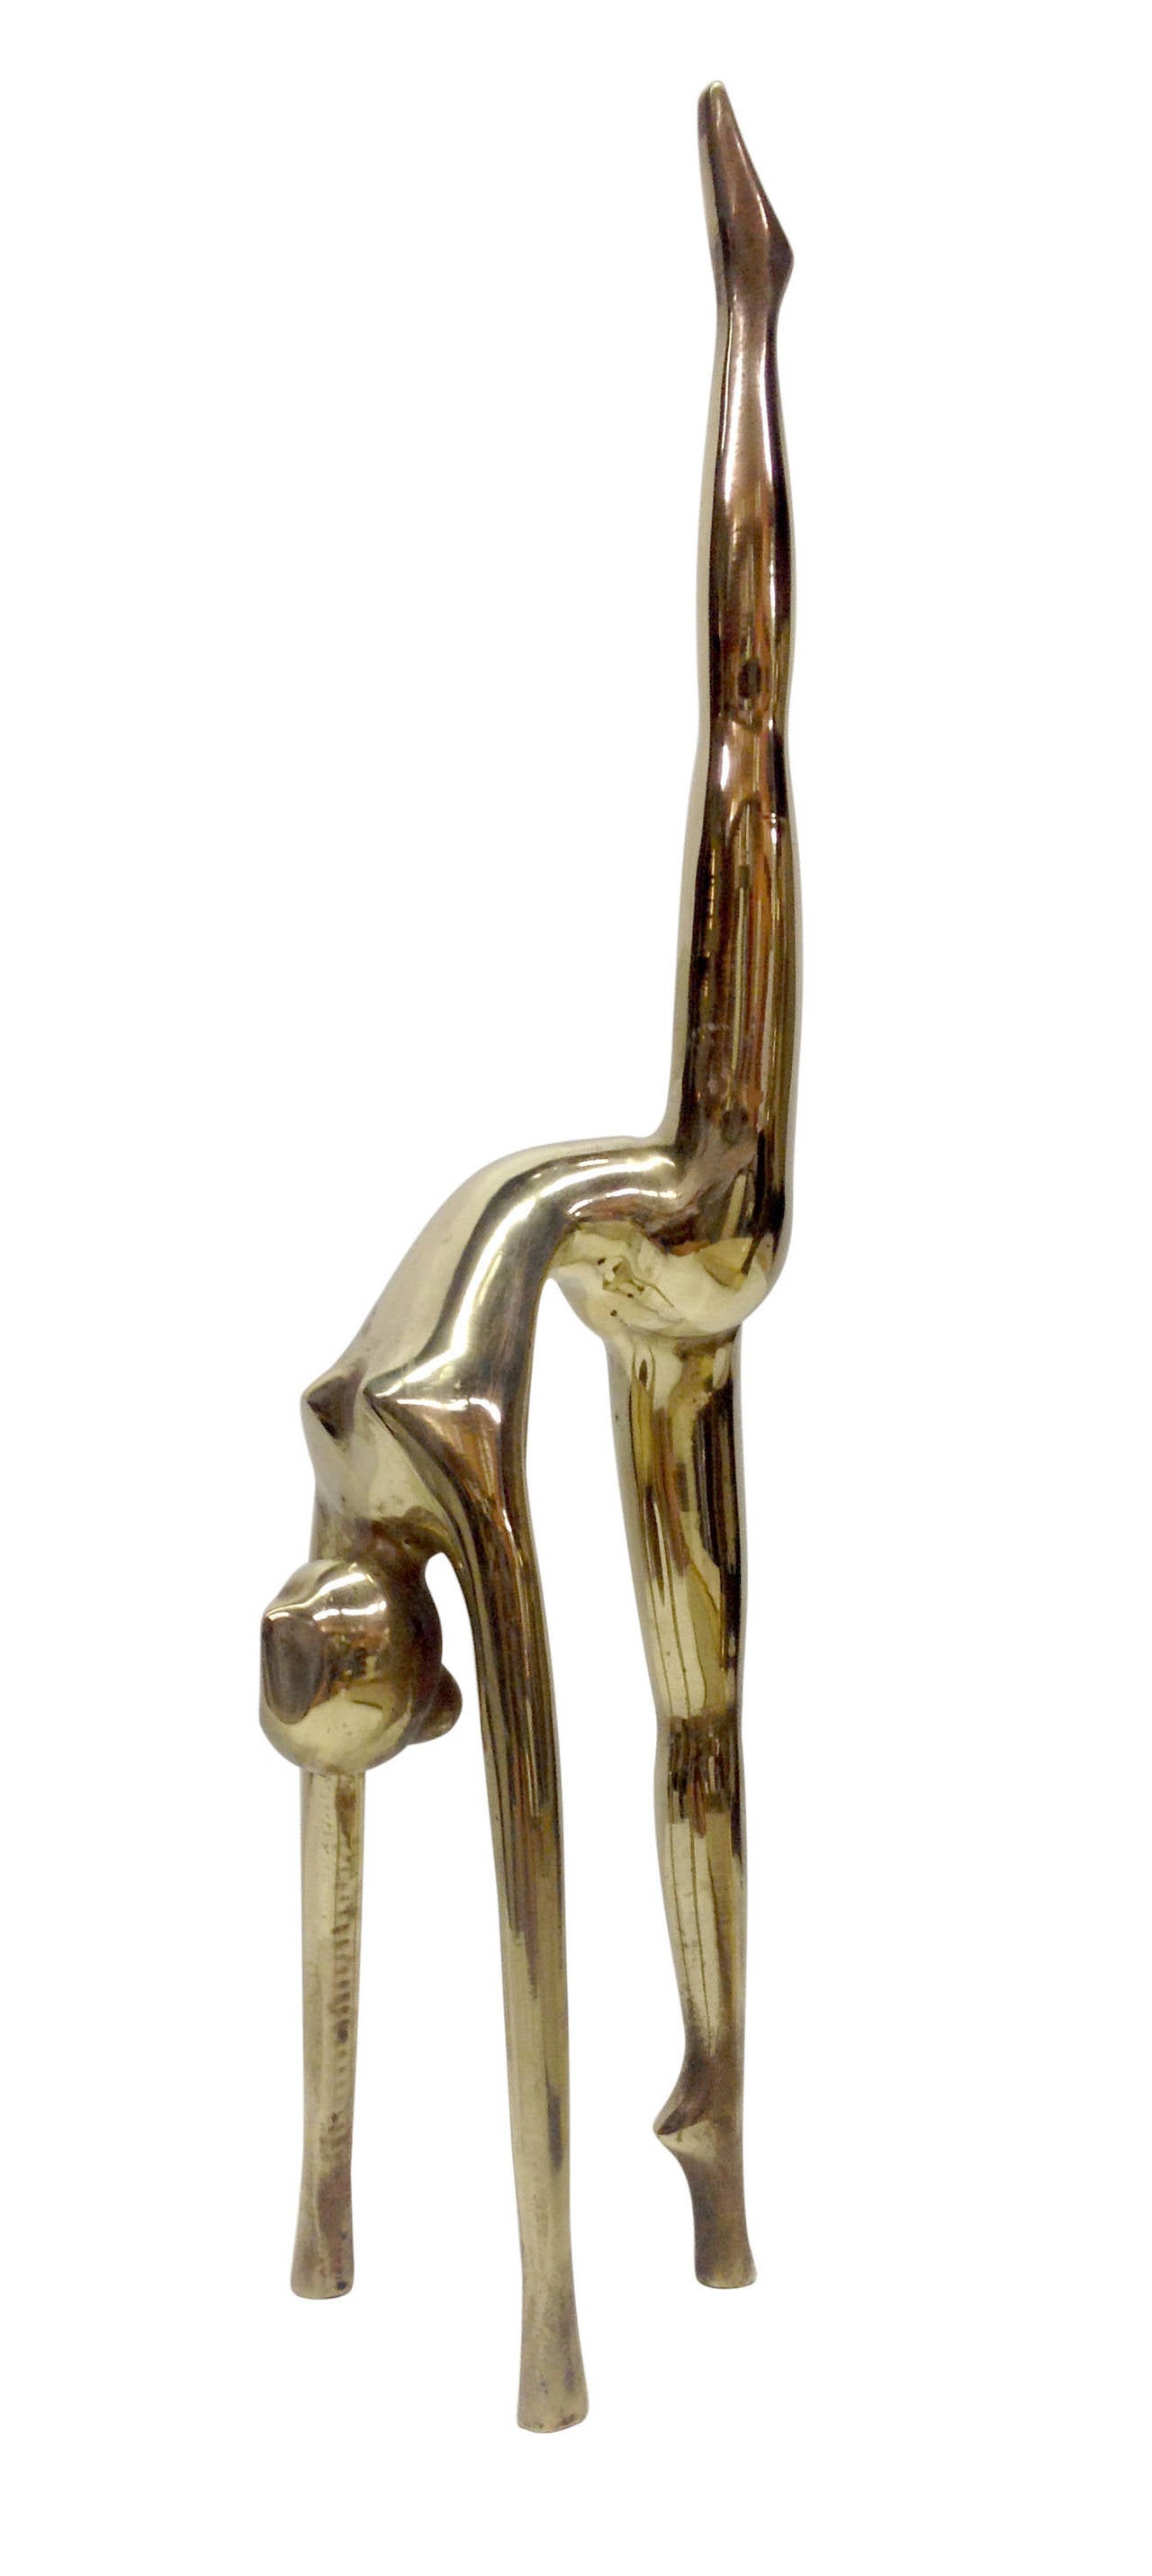 This sculpture depicting a gymnast is rendered entirely out of bronze in a smooth, elongated fashion. She can stand alone as a sculpture, or could be used as a jewelry holder or a paperweight.